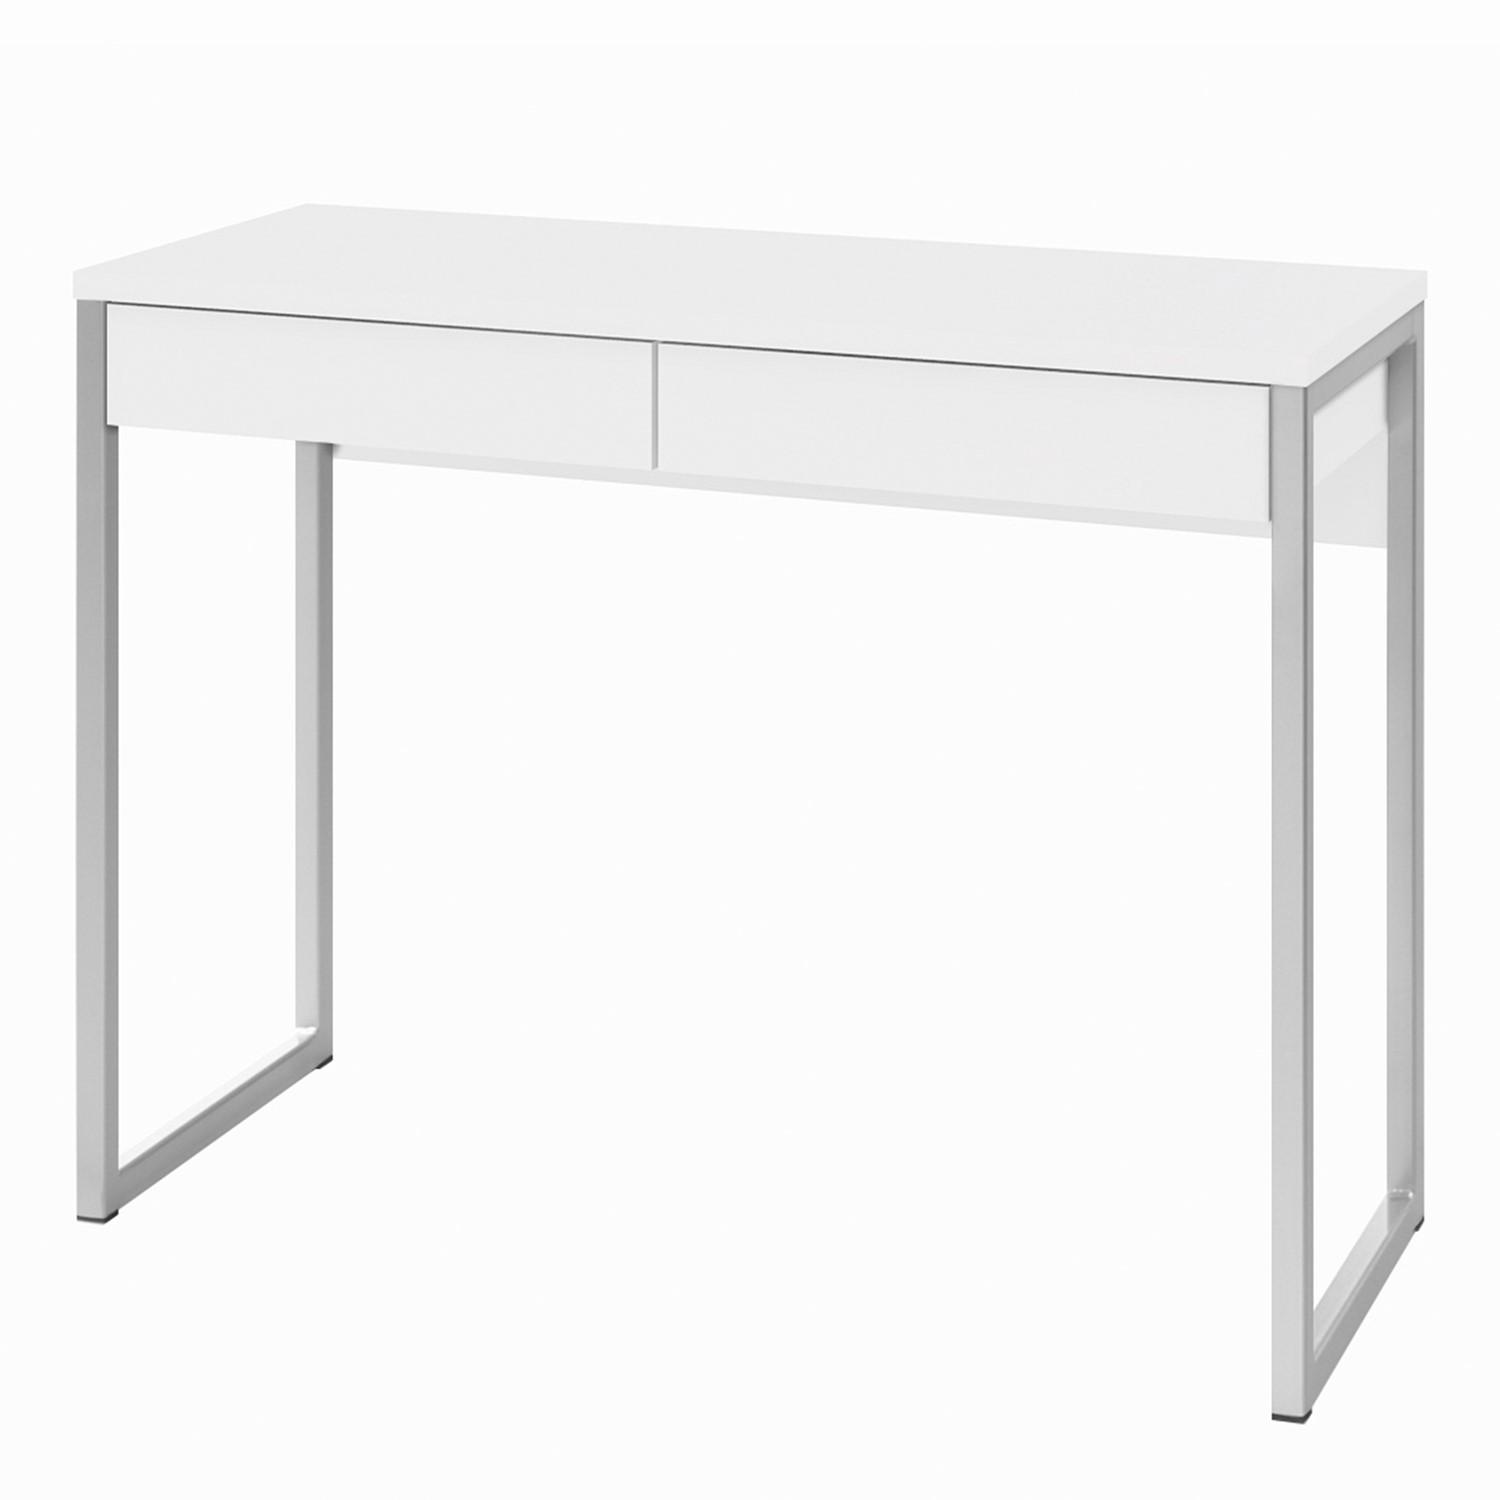 Read more about White high gloss office desk with 2 drawers function plus